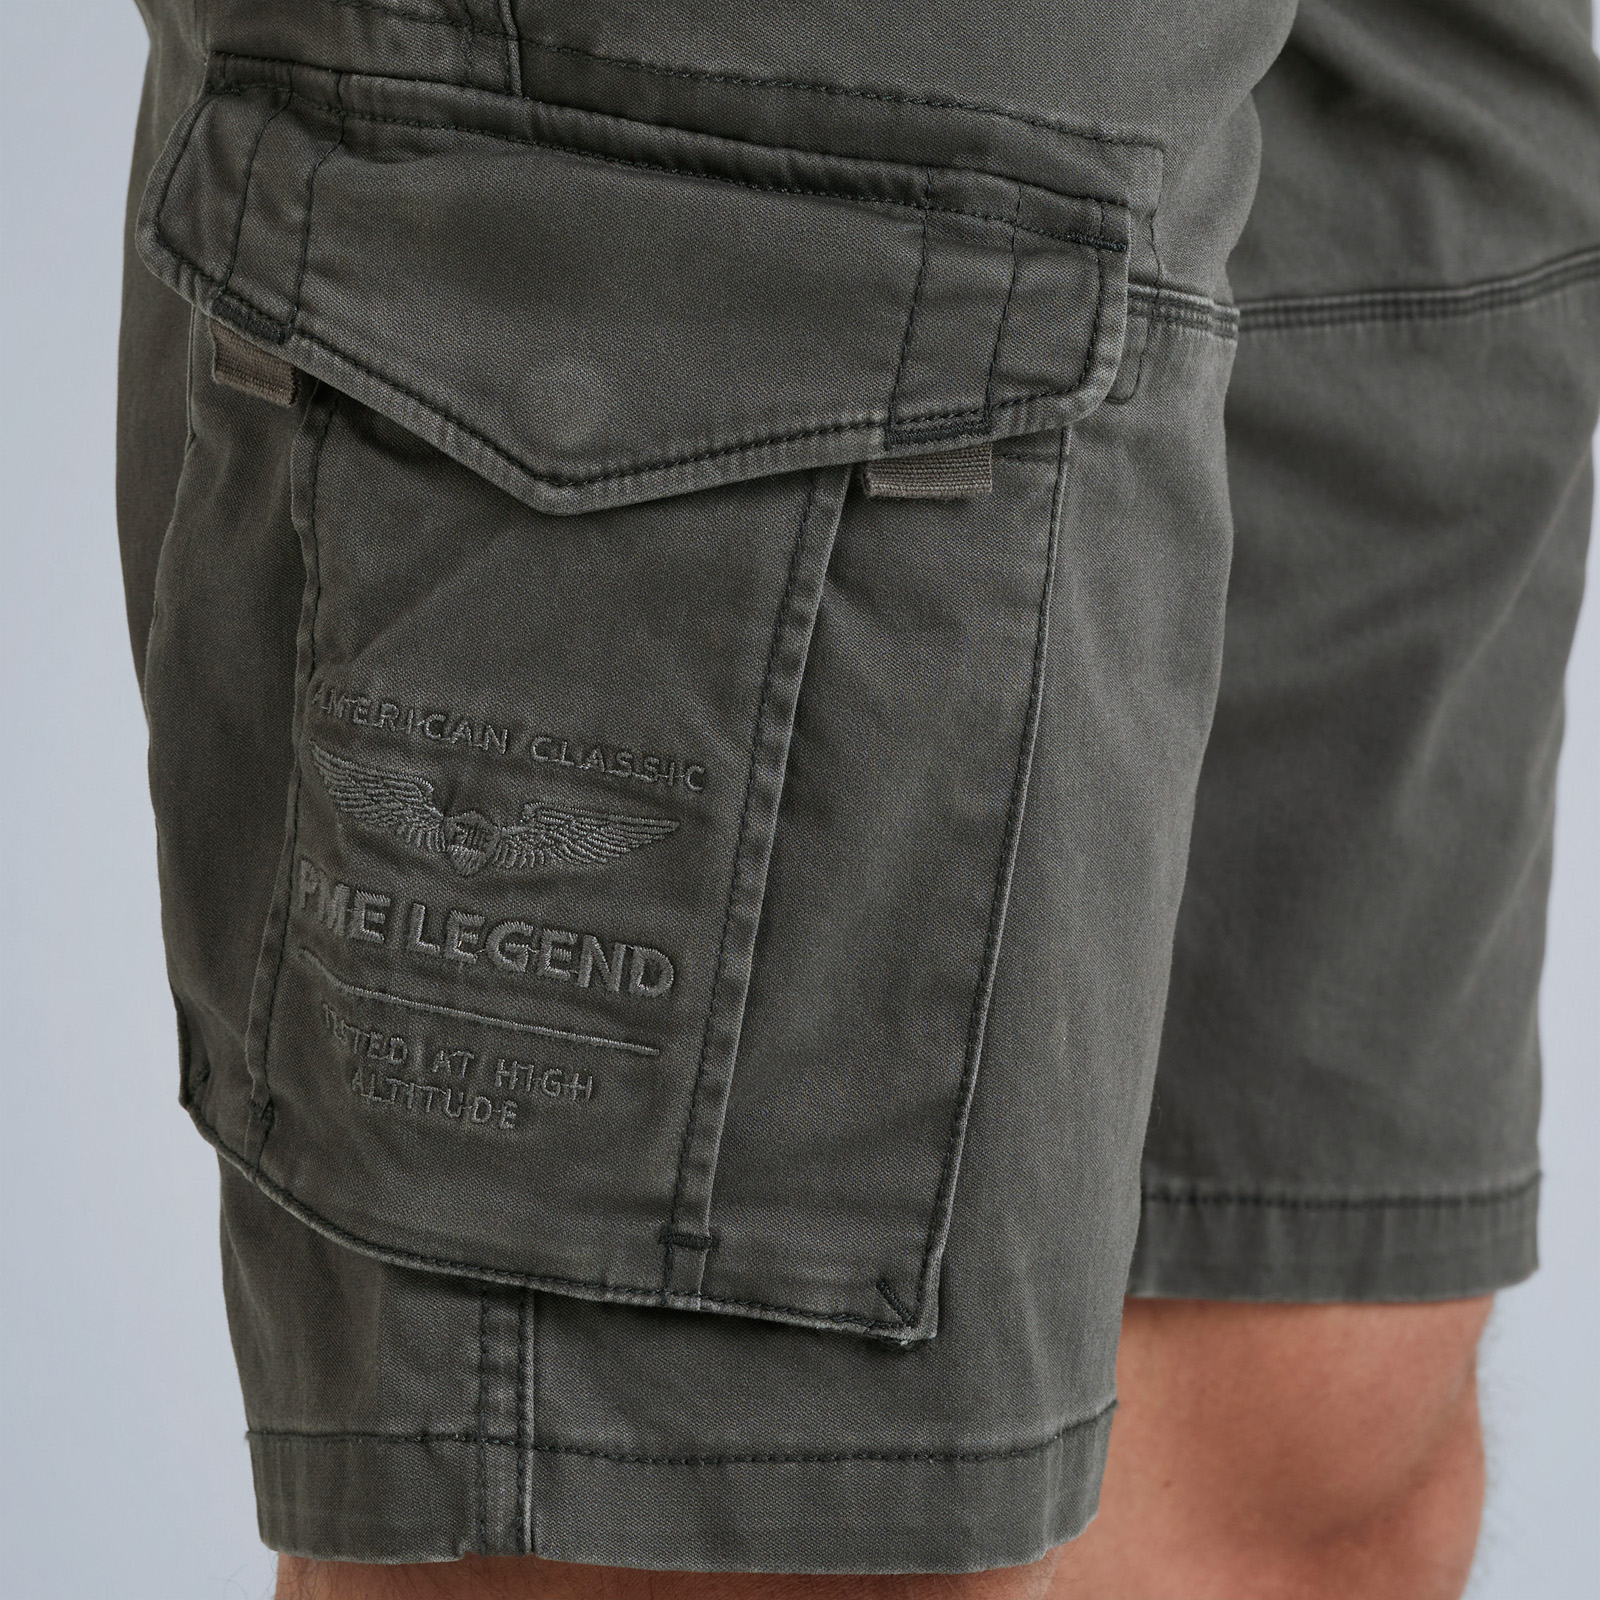 shipping Twill | returns PME LEGEND Short Stretch Free and | Cargo